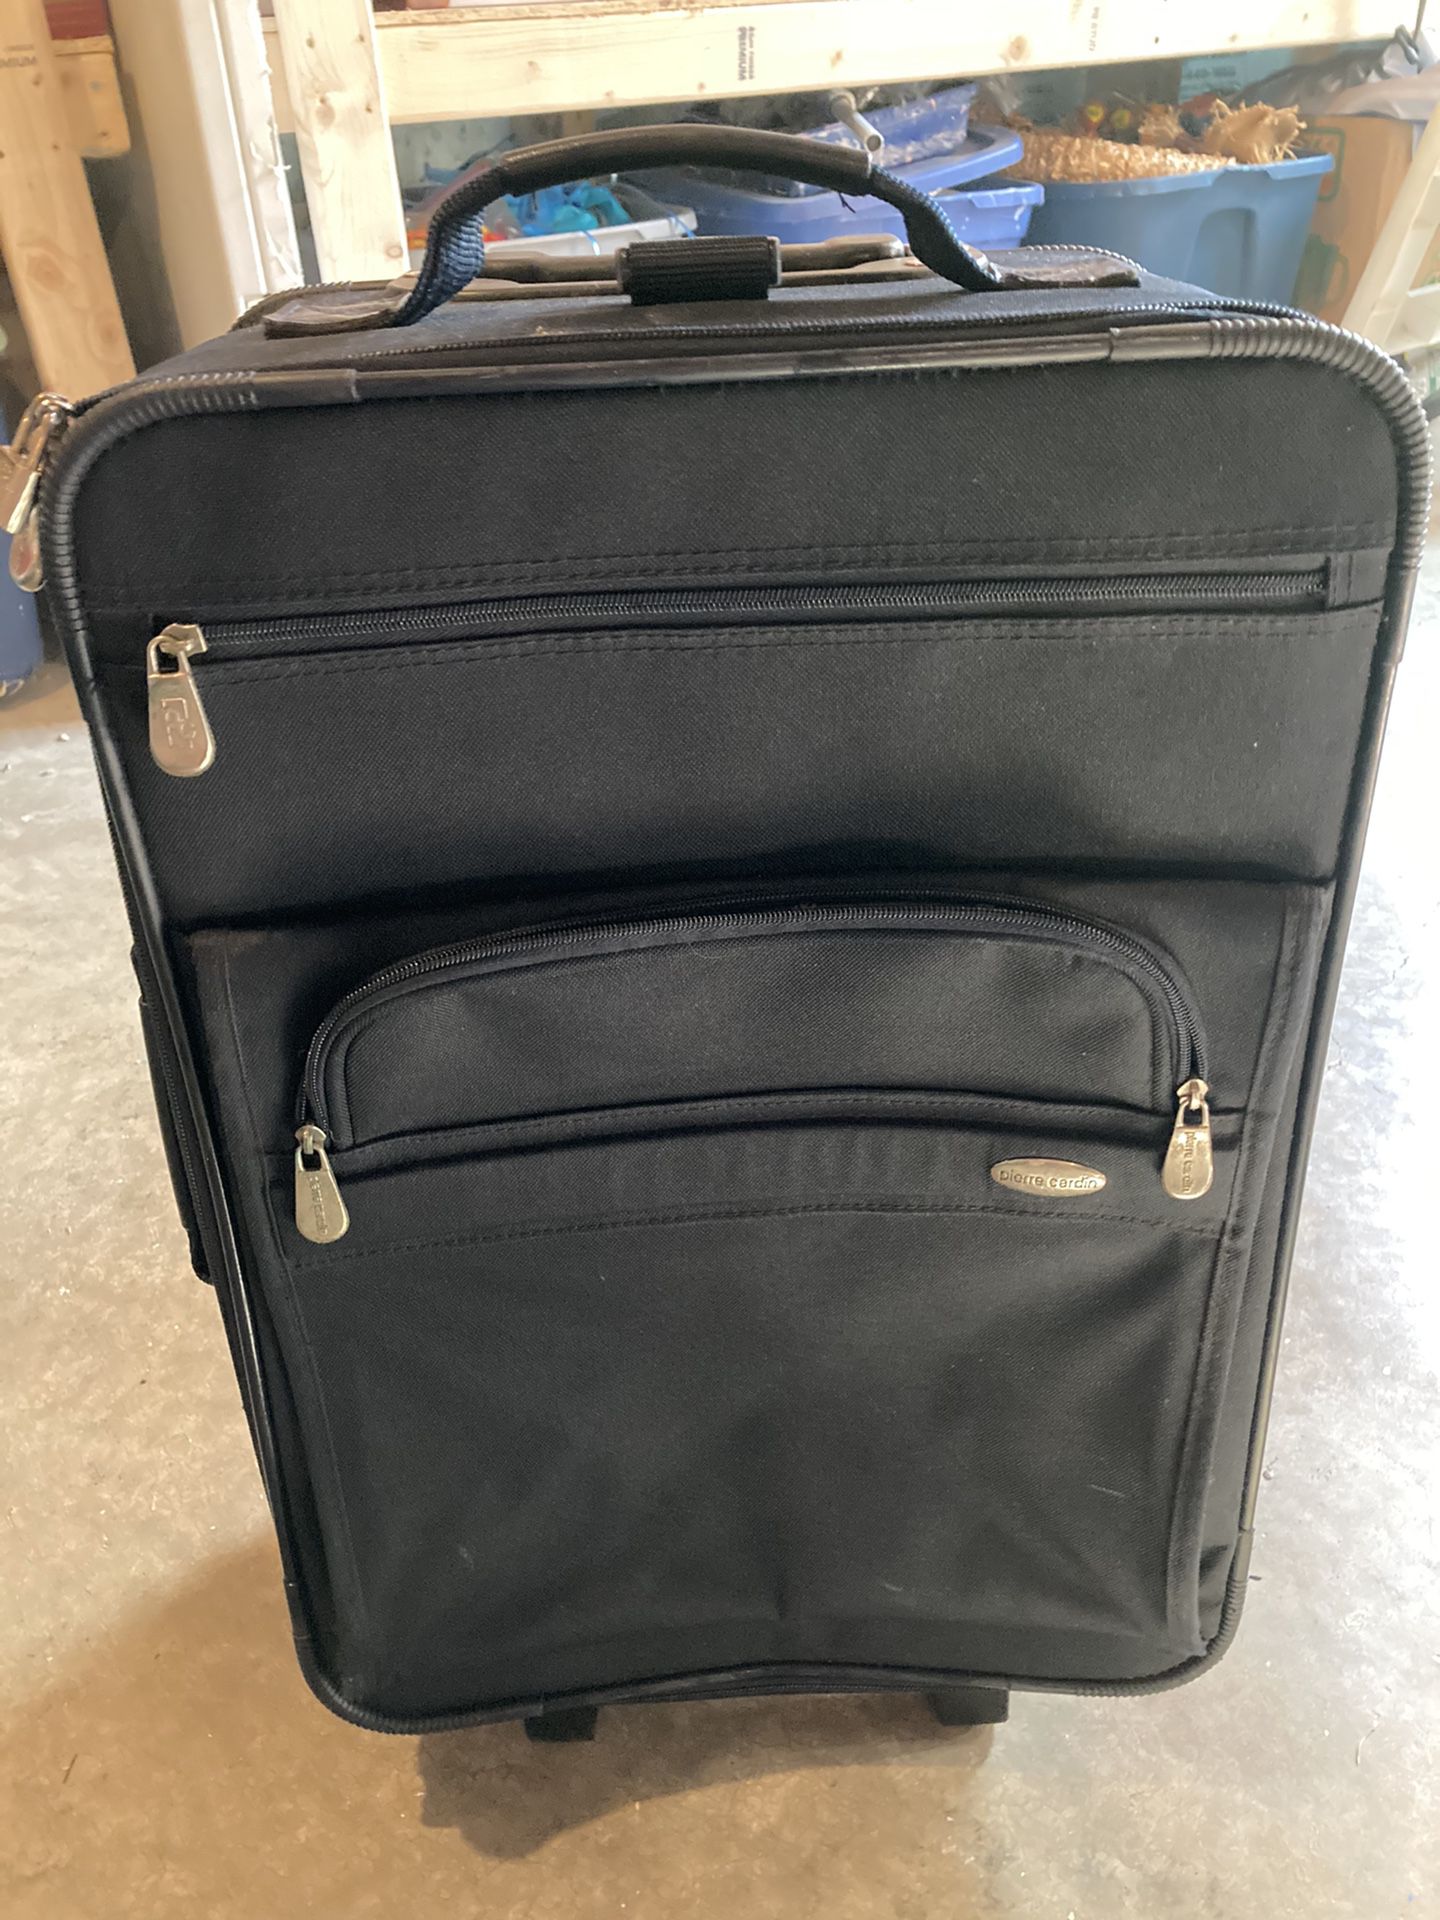 Carry on luggage suitcase